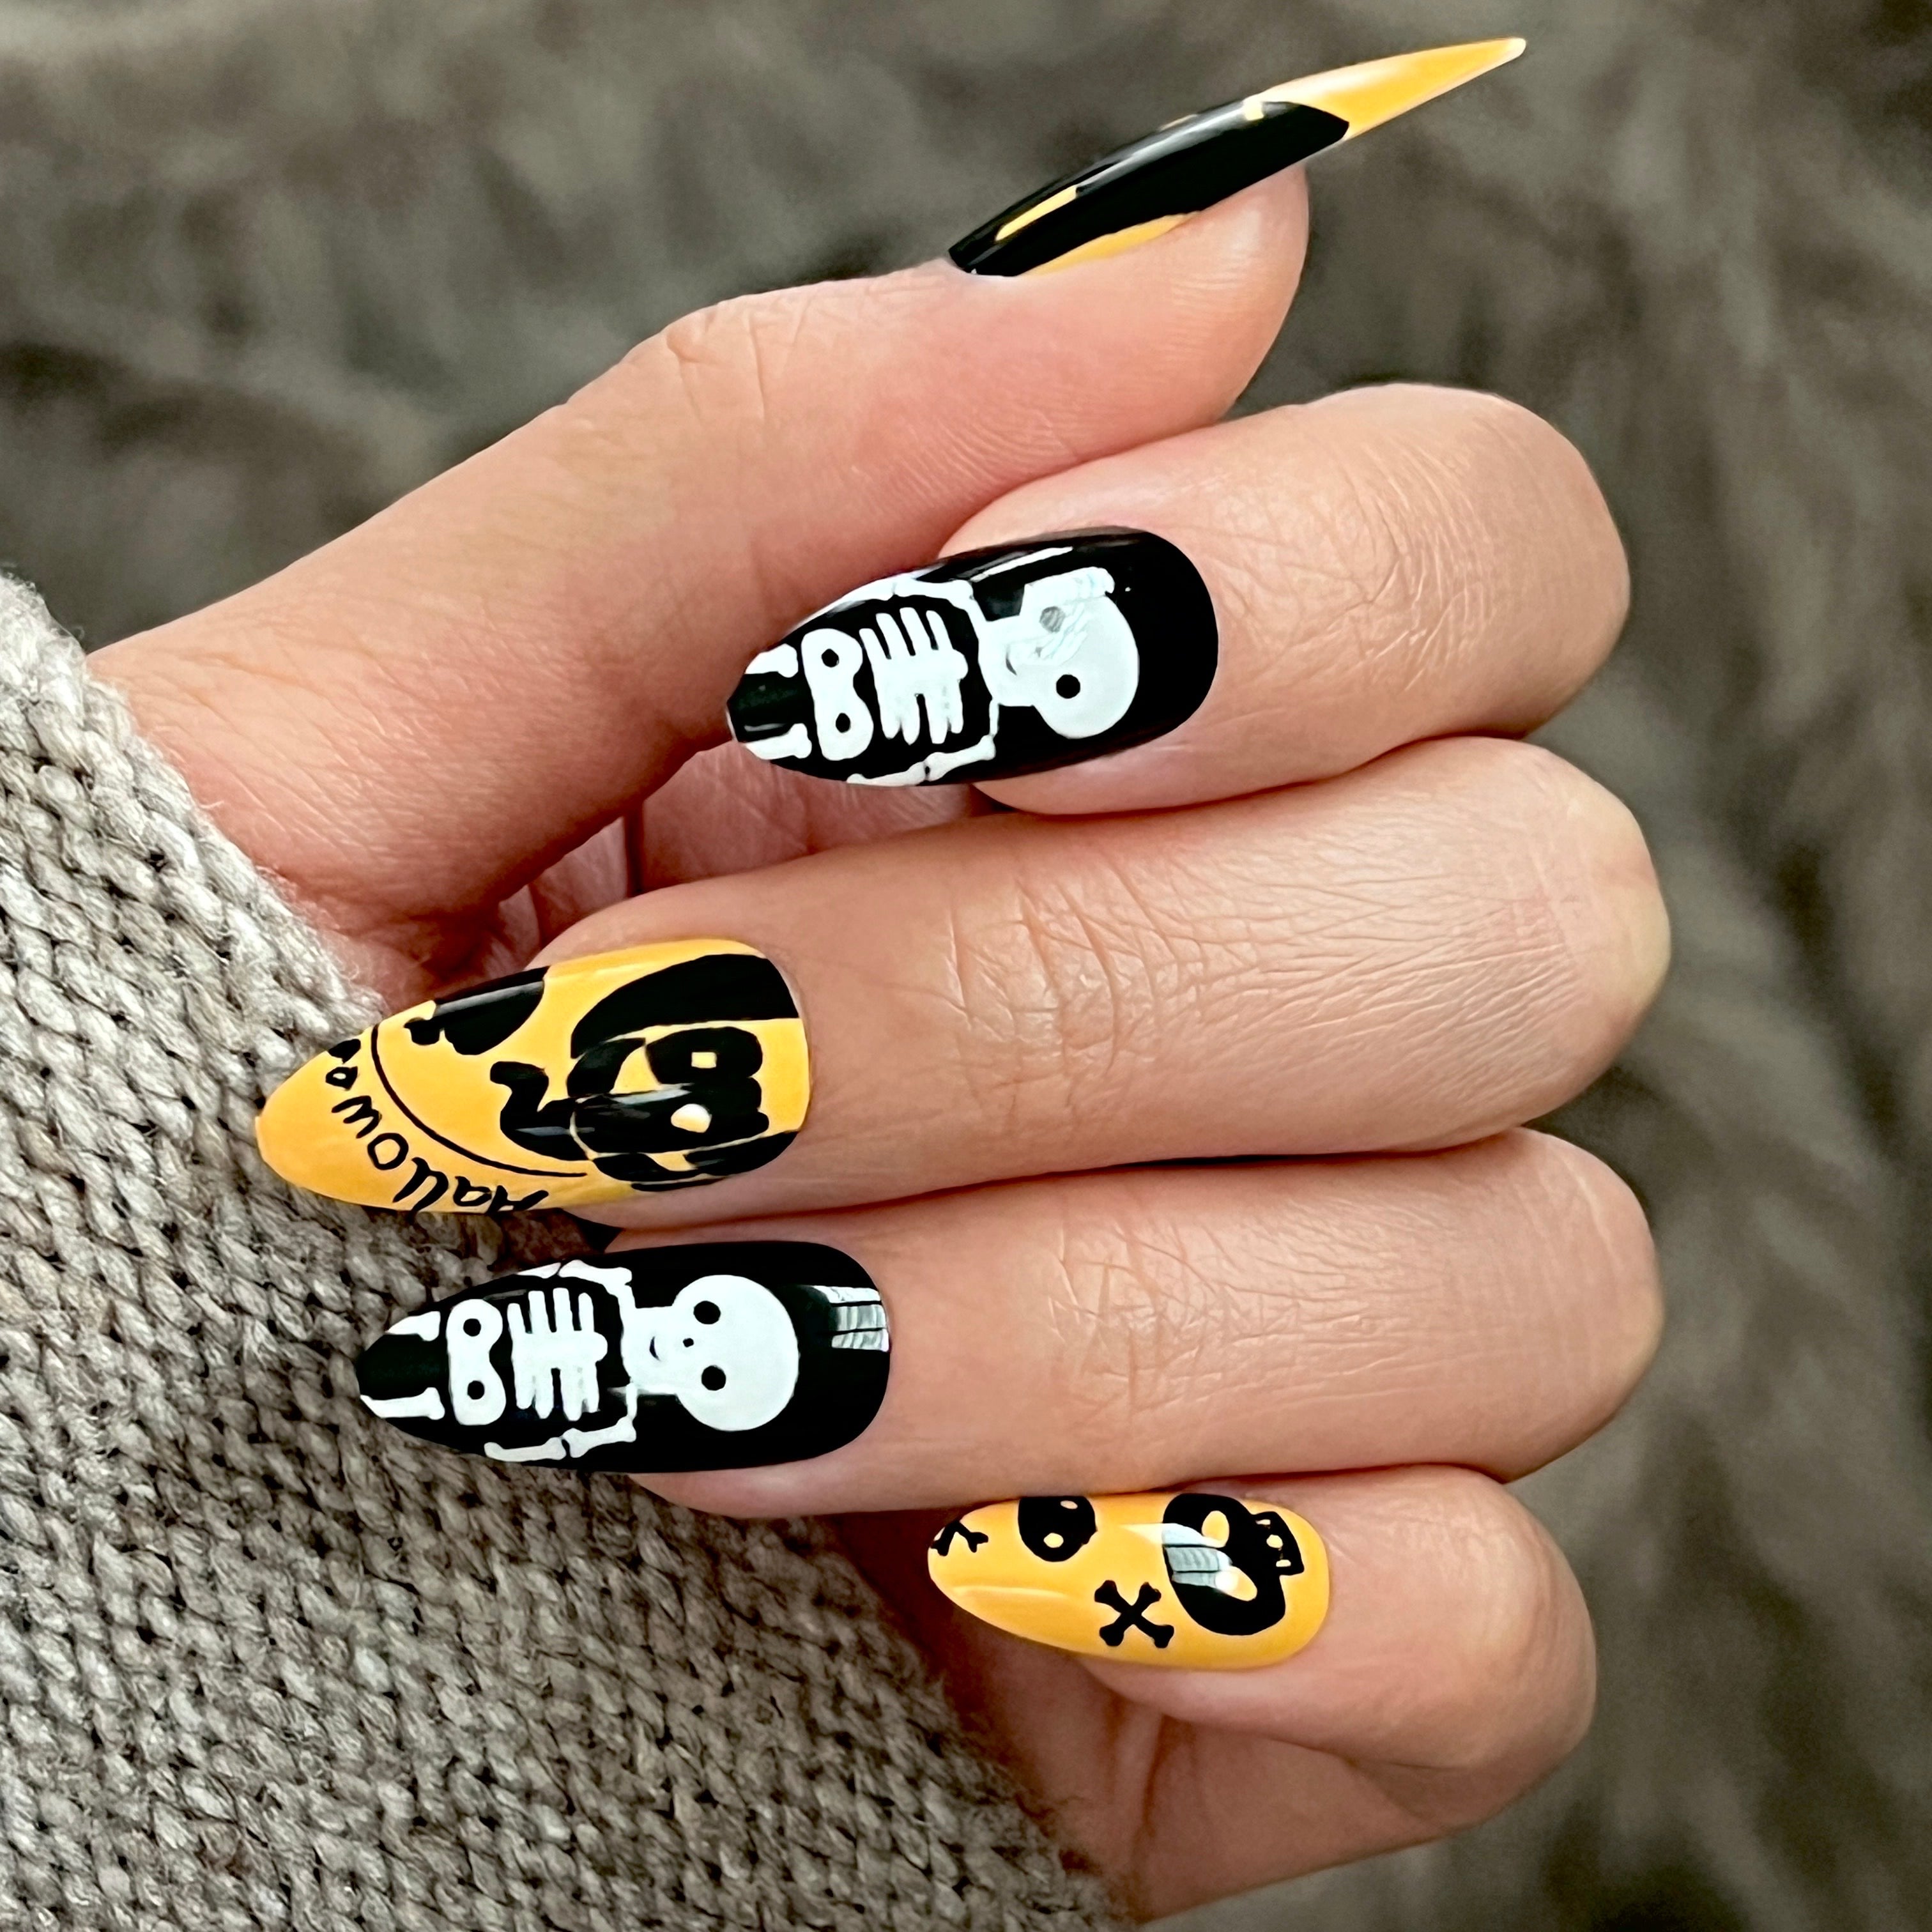 TRICK OR TREAT ALMOND SHAPE PRESS ON NAILS